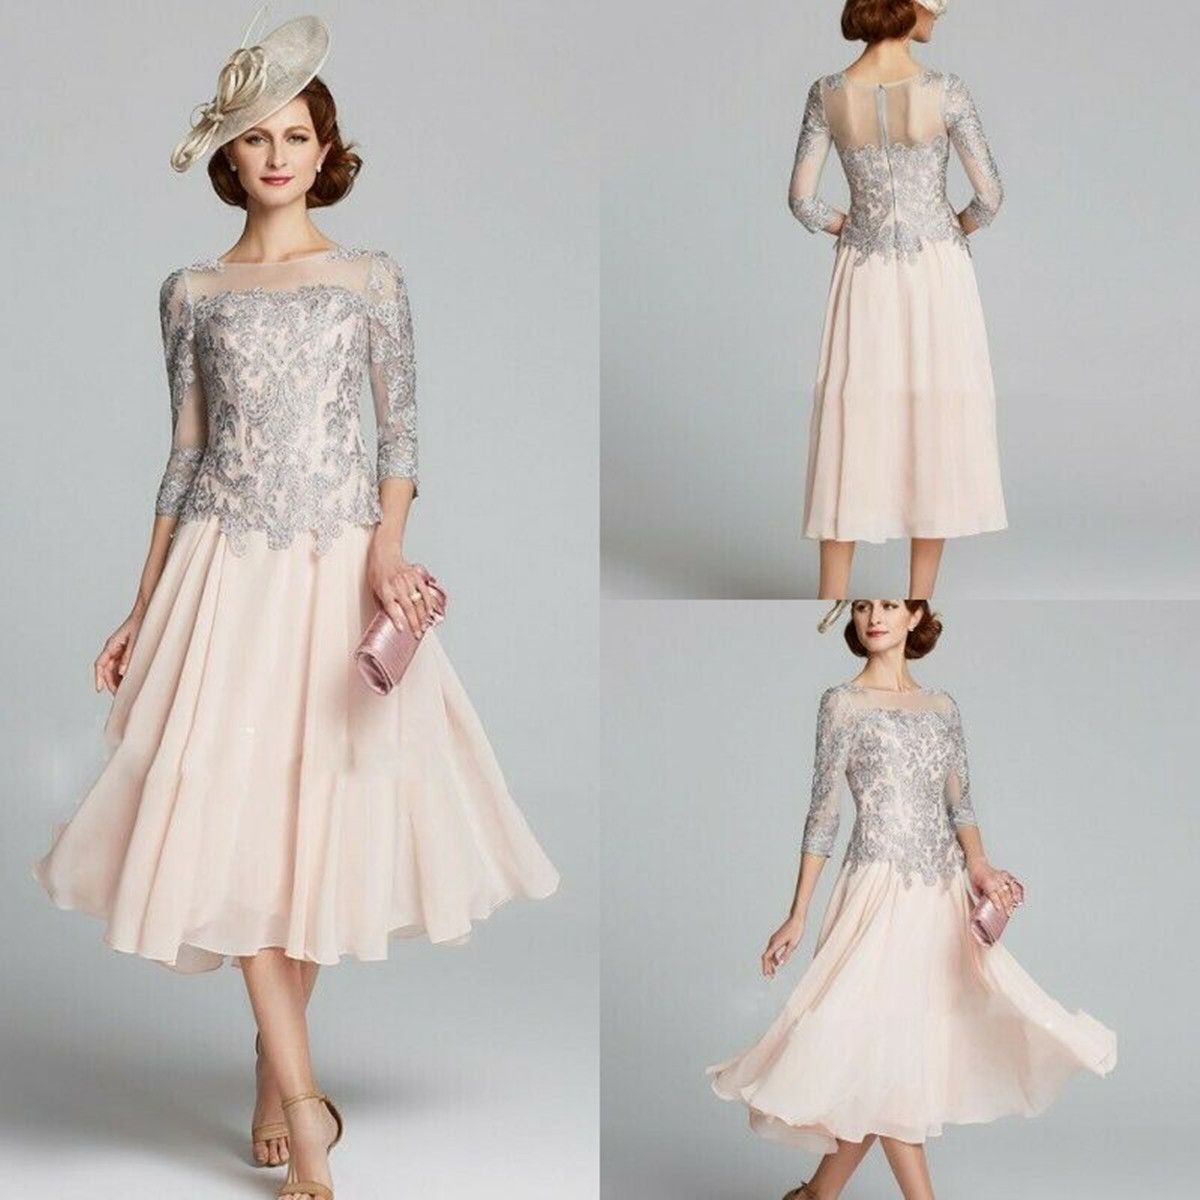 2019 Chiffon Mother Of The Bride Dresses 3/4 Long Sleeves